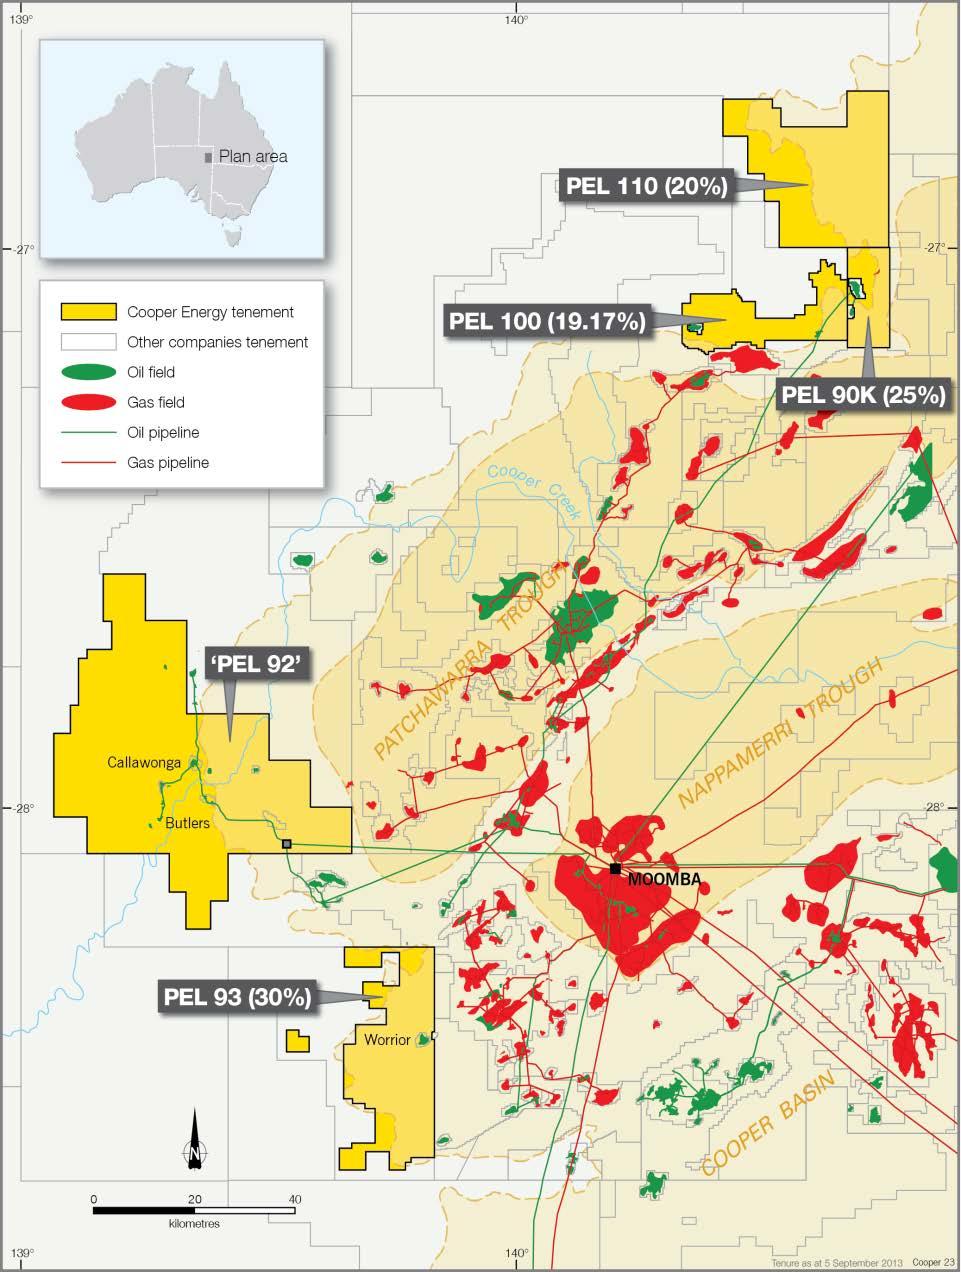 Cooper Basin Low cost cash generating oil production March year to date production of 0.19 MMbbl vs 0.